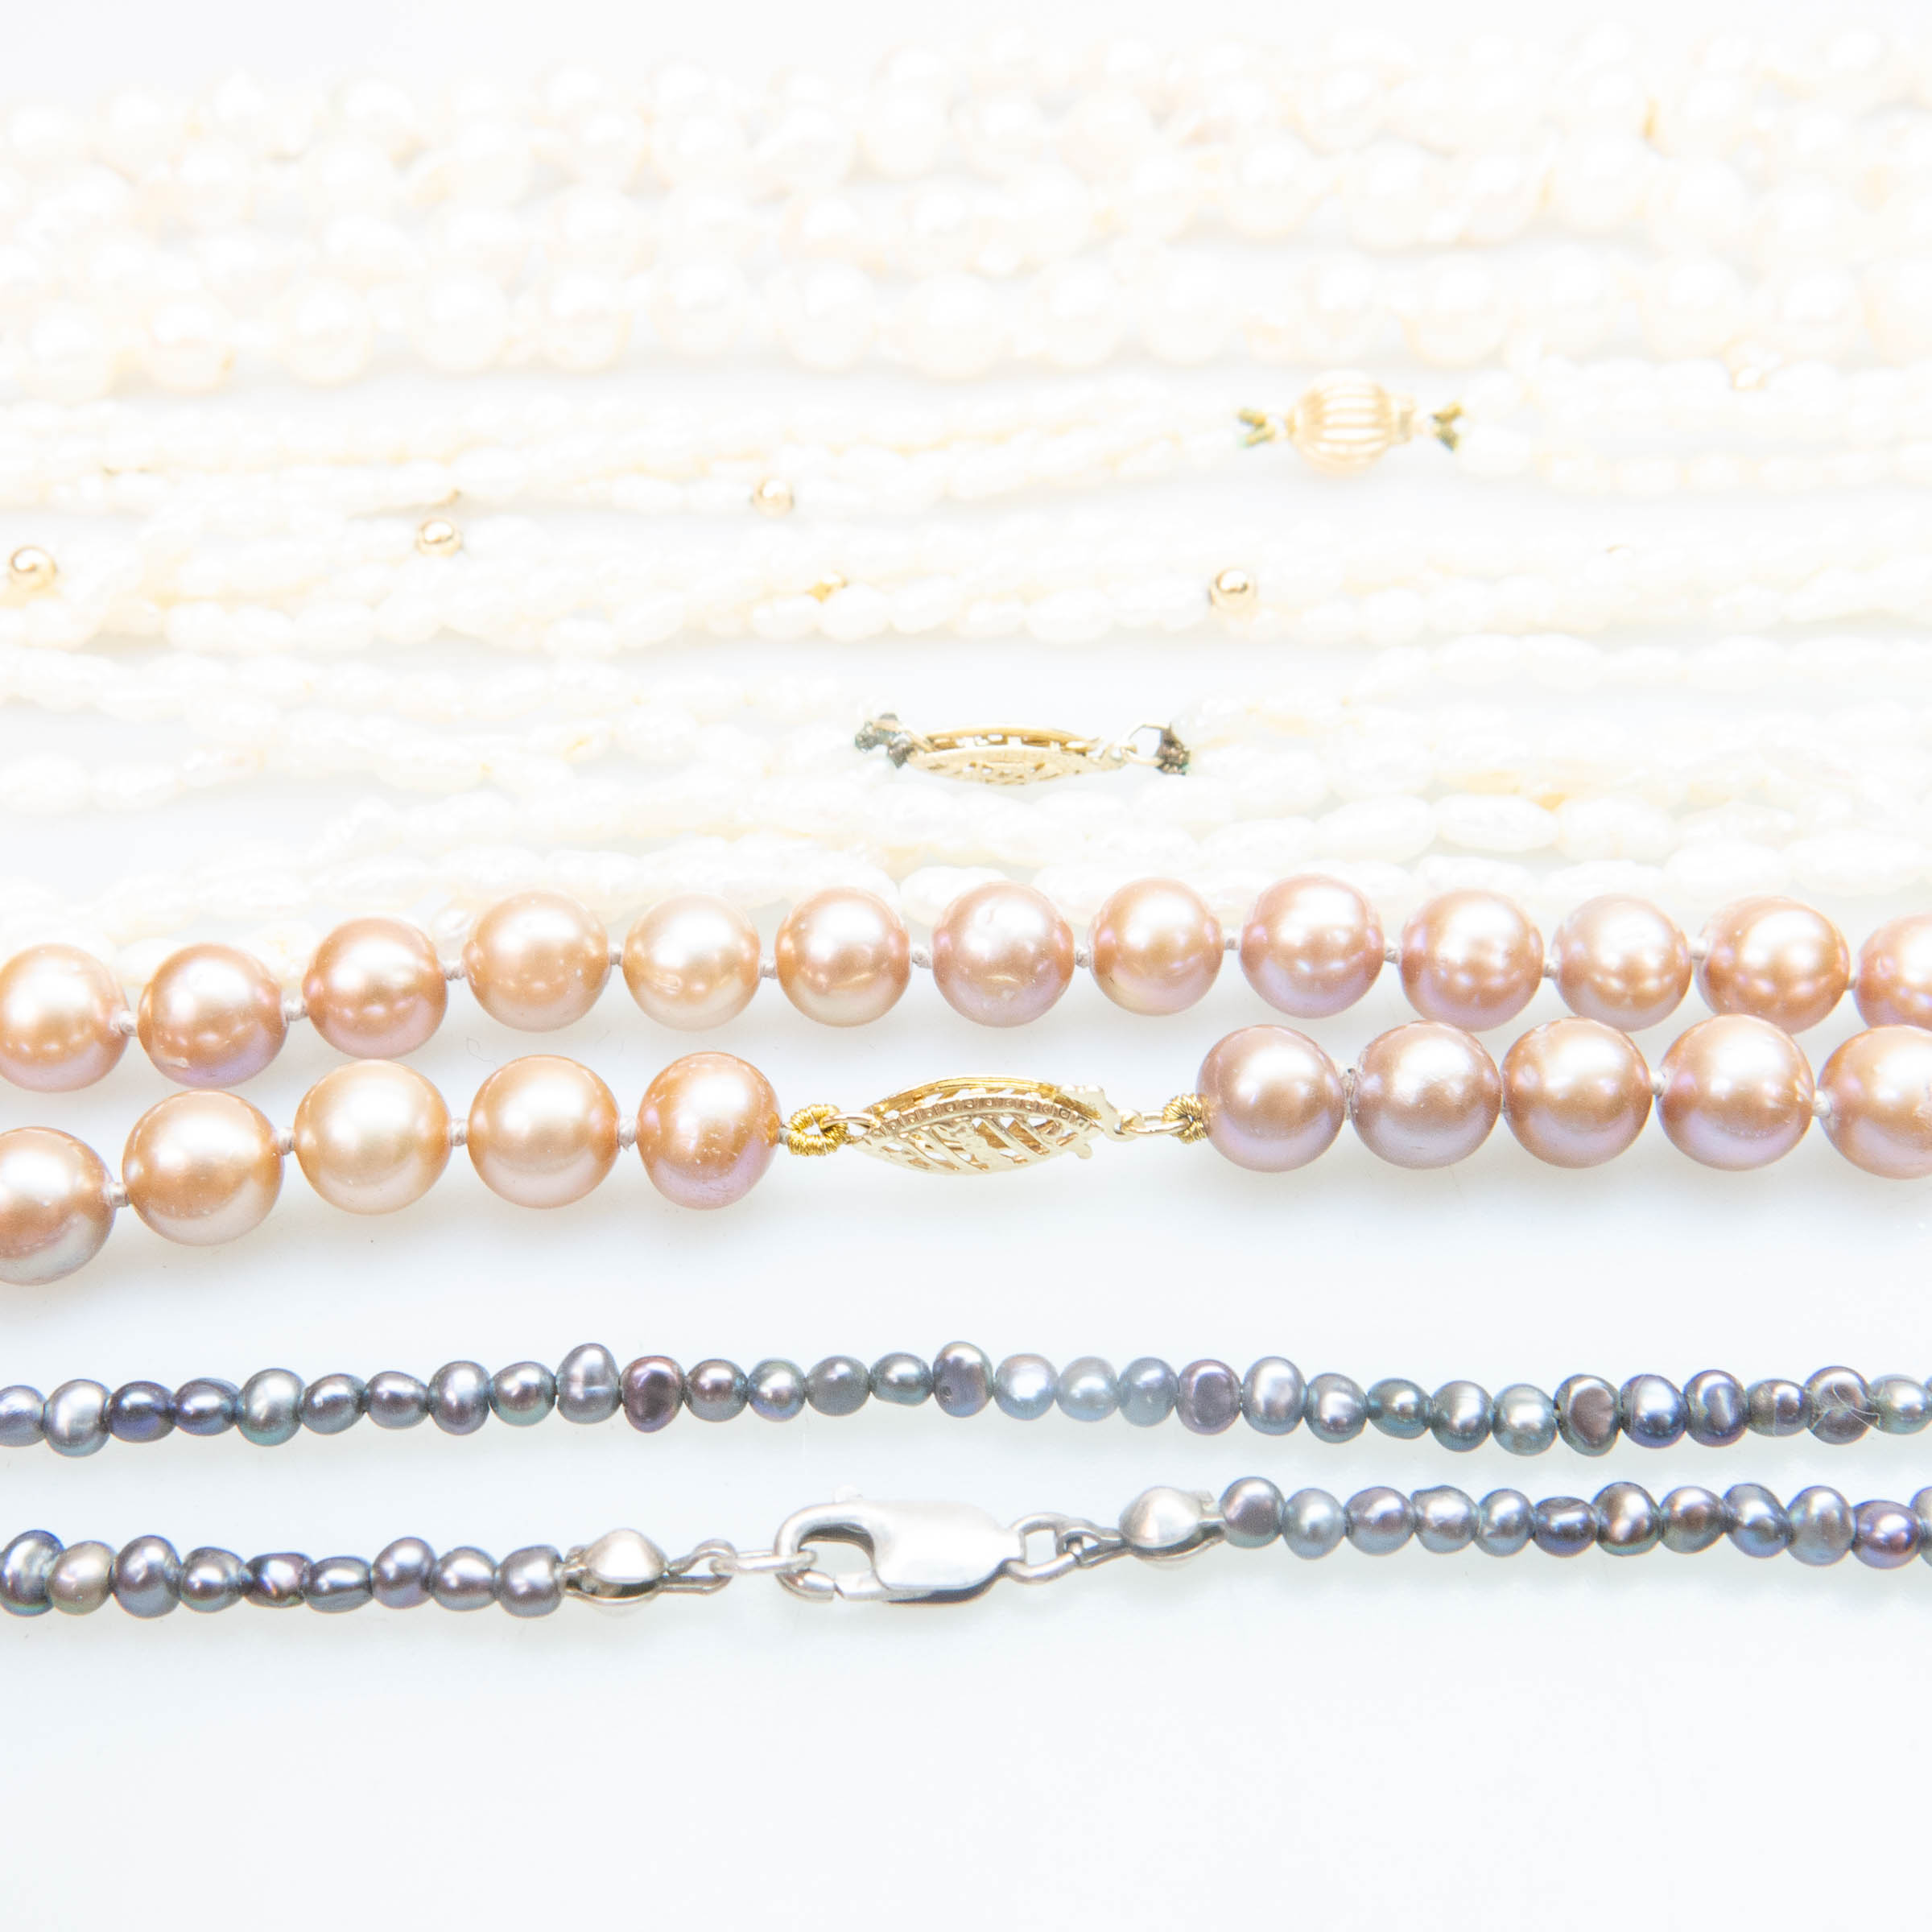 Small Quantity Of Pearl Necklaces